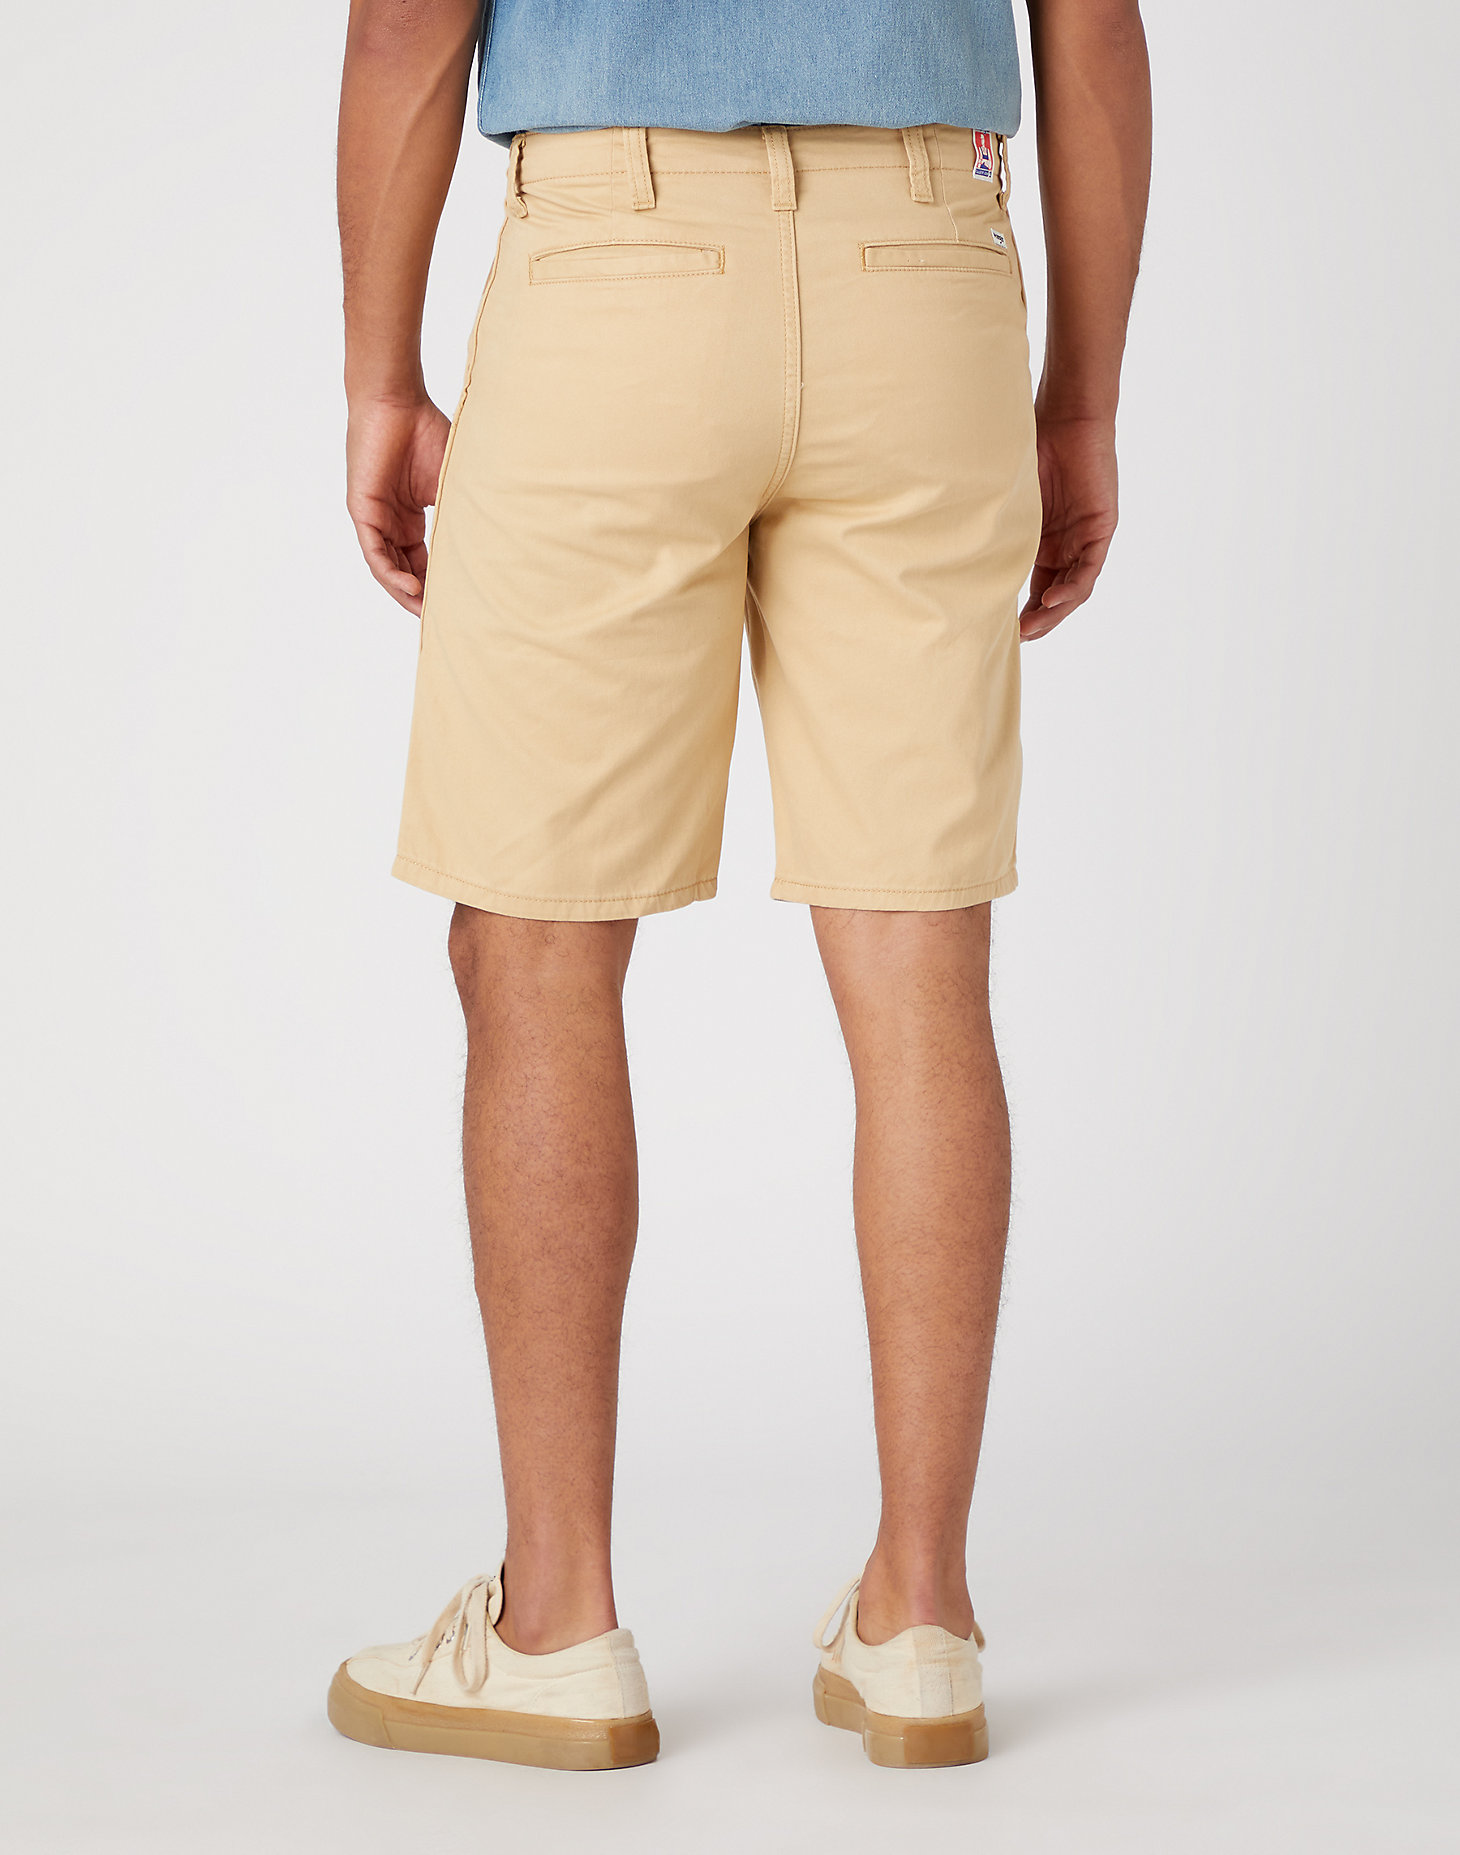 Casey Chino Shorts in Taos Taupe alternative view 2